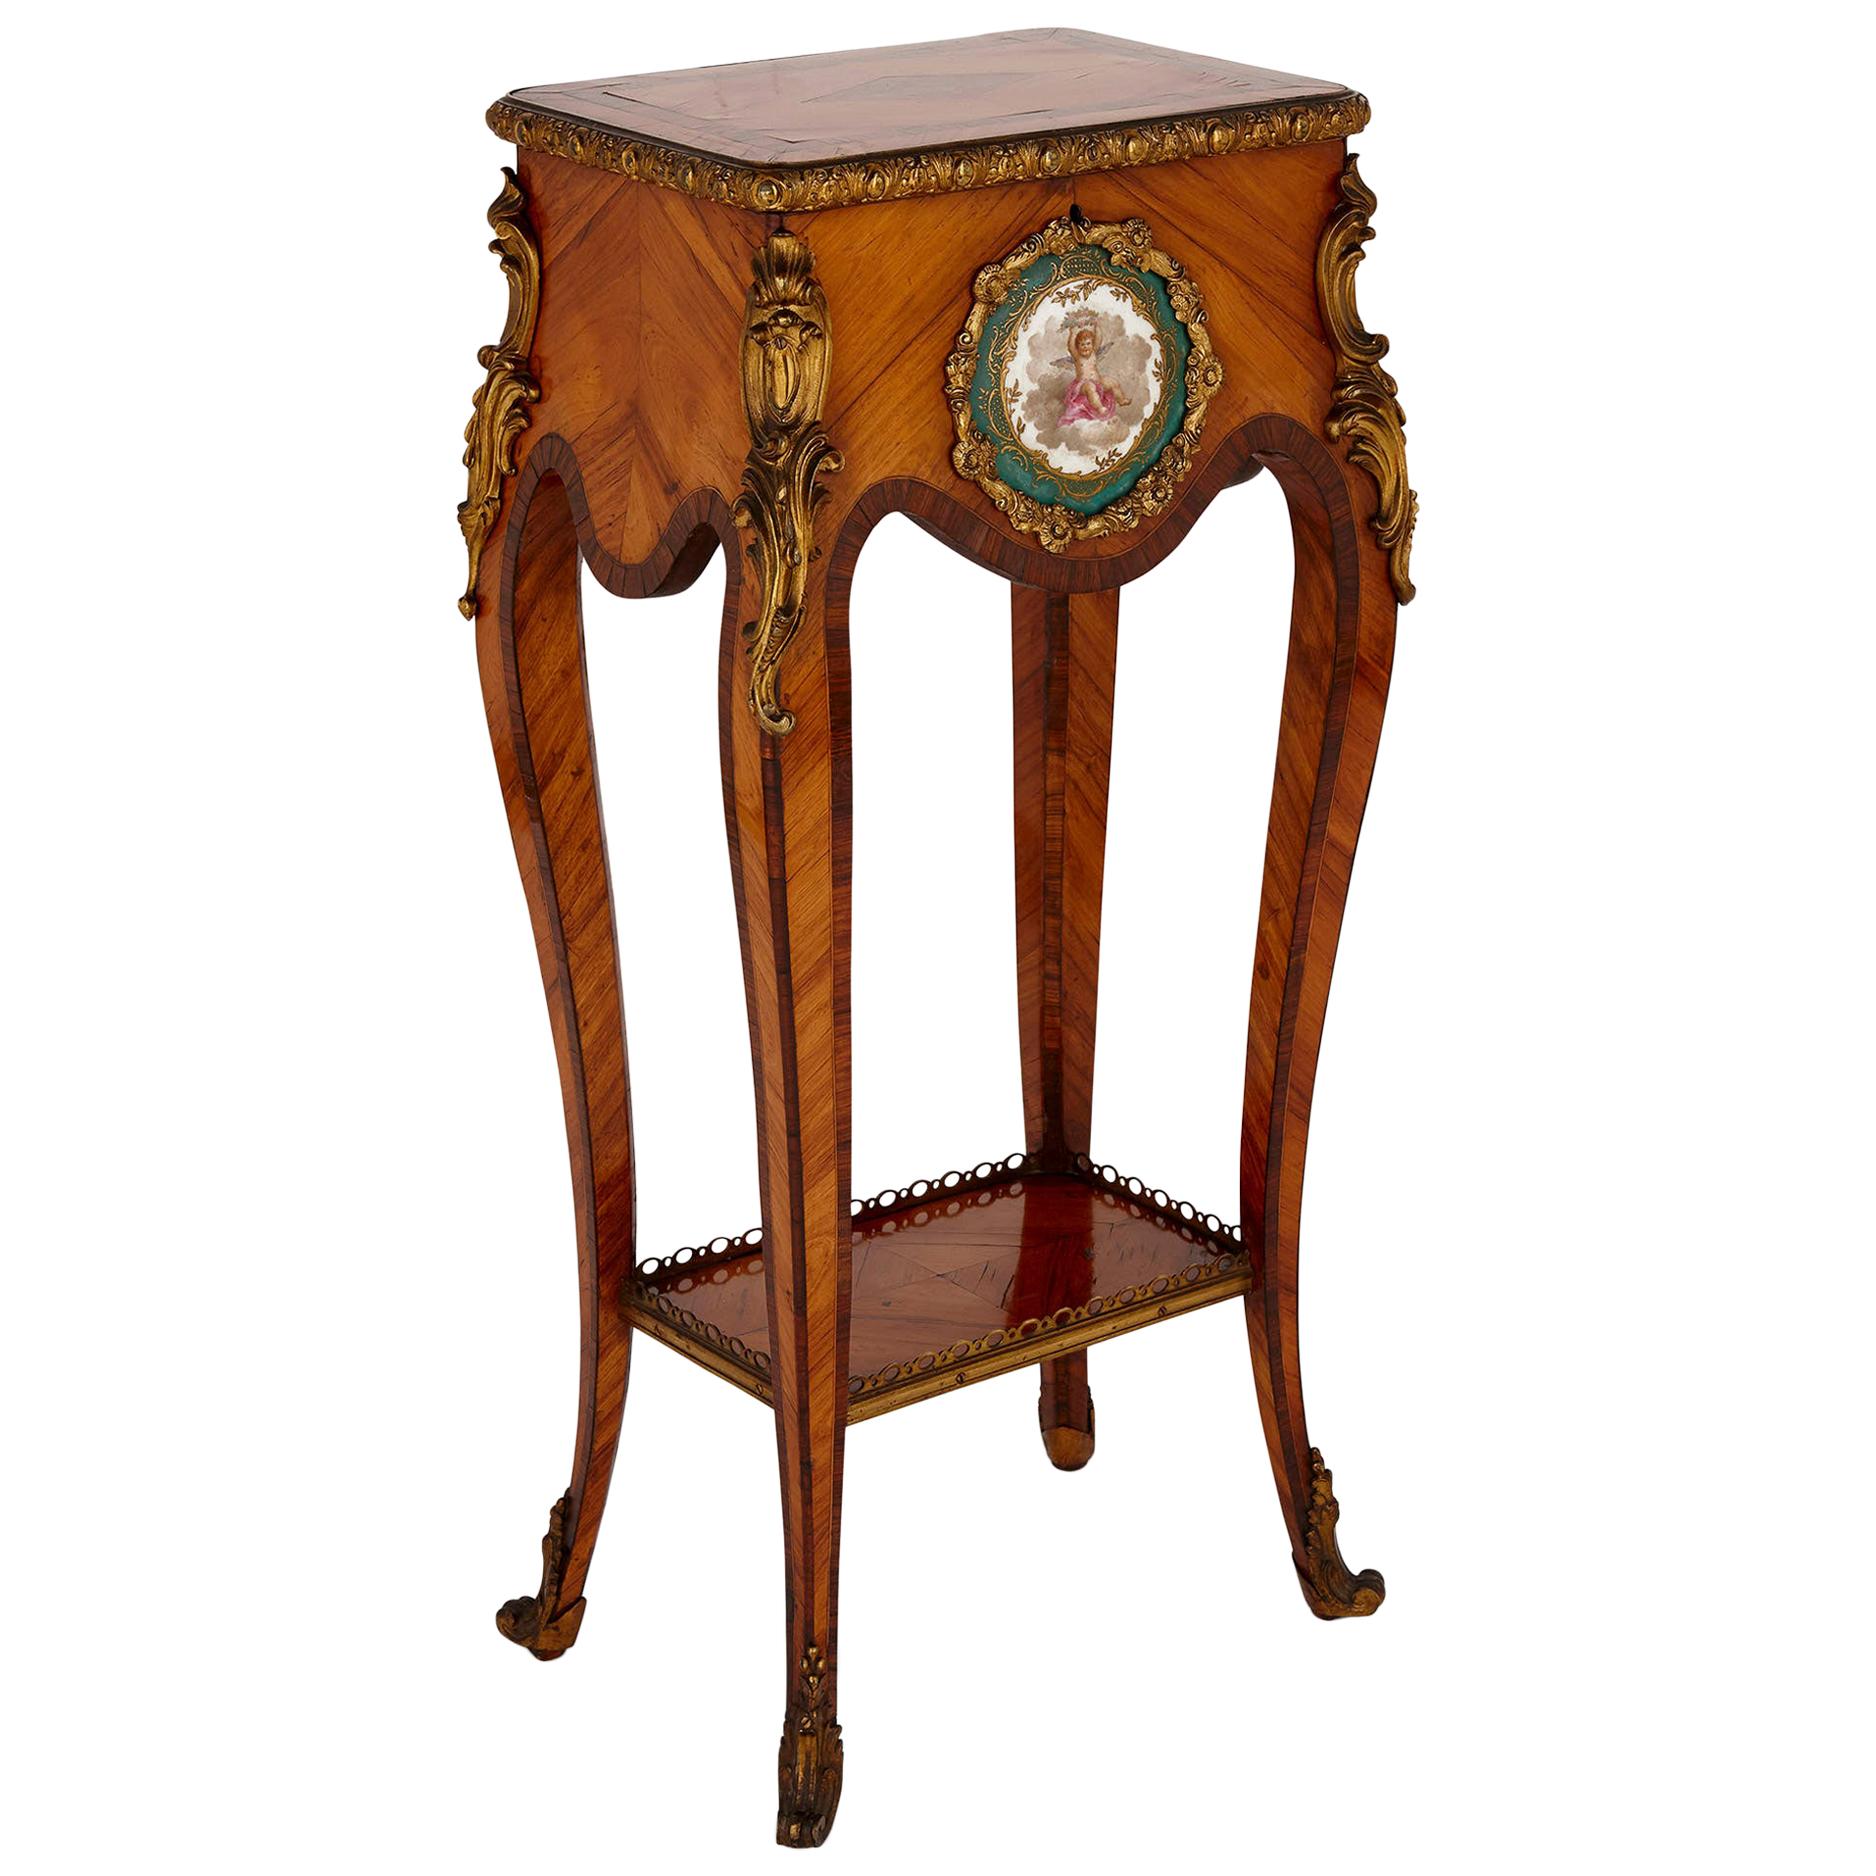 English Rococo Style Side Table Mounted with Gilt Bronze and Porcelain